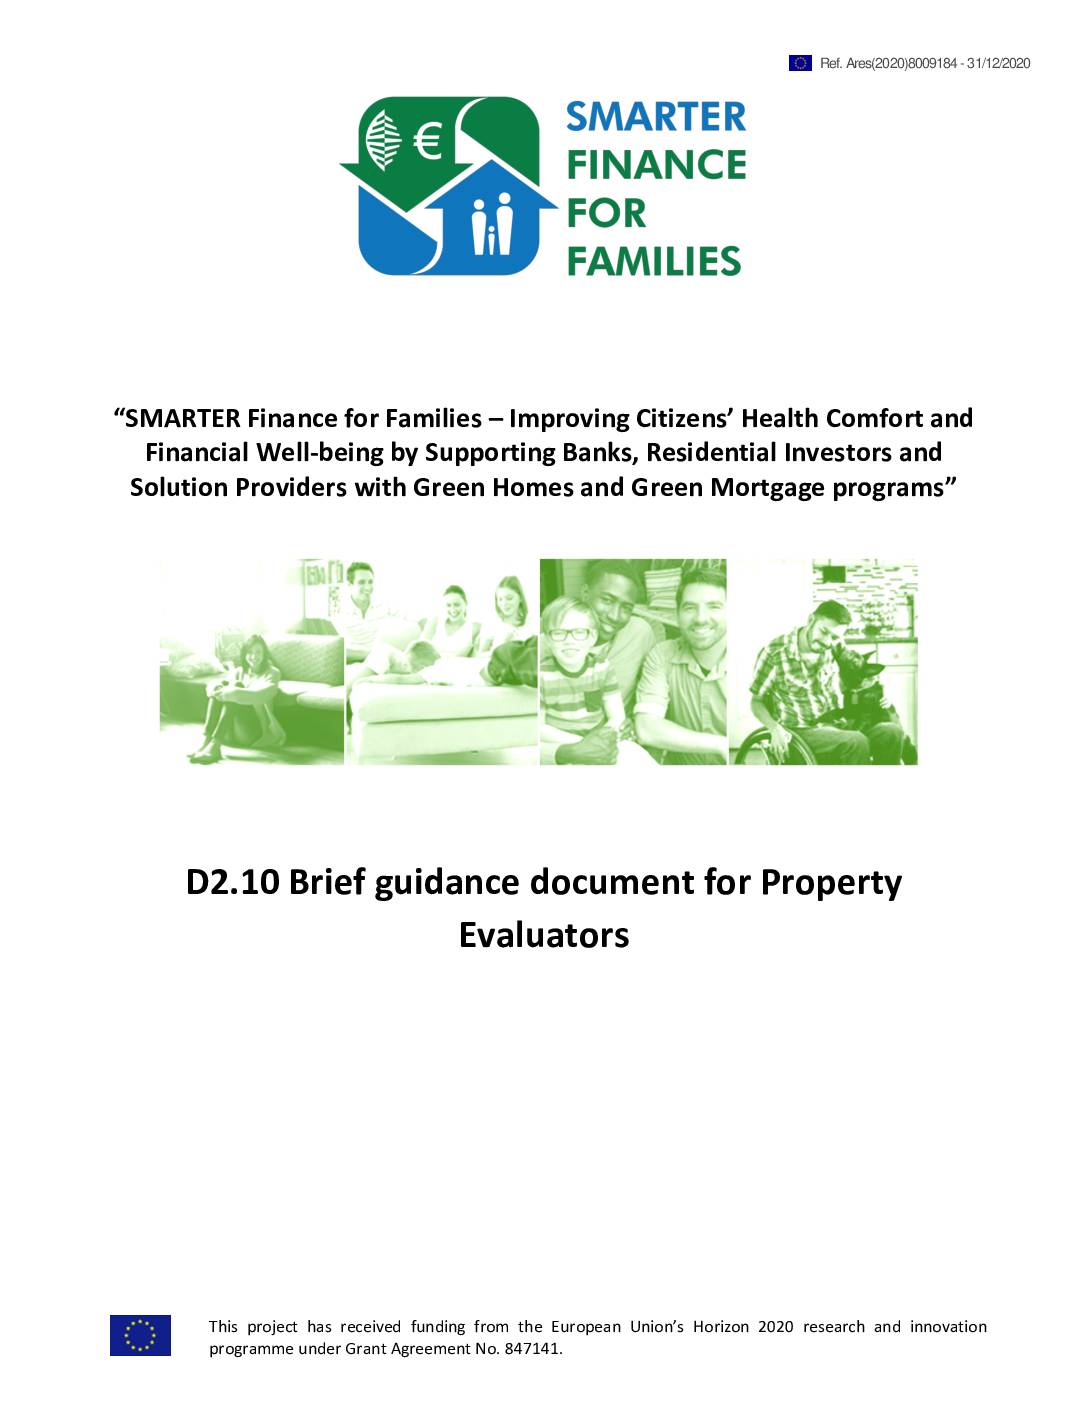 Guidance Document For Property Evaluators: Green Homes Appraisal Toolkit